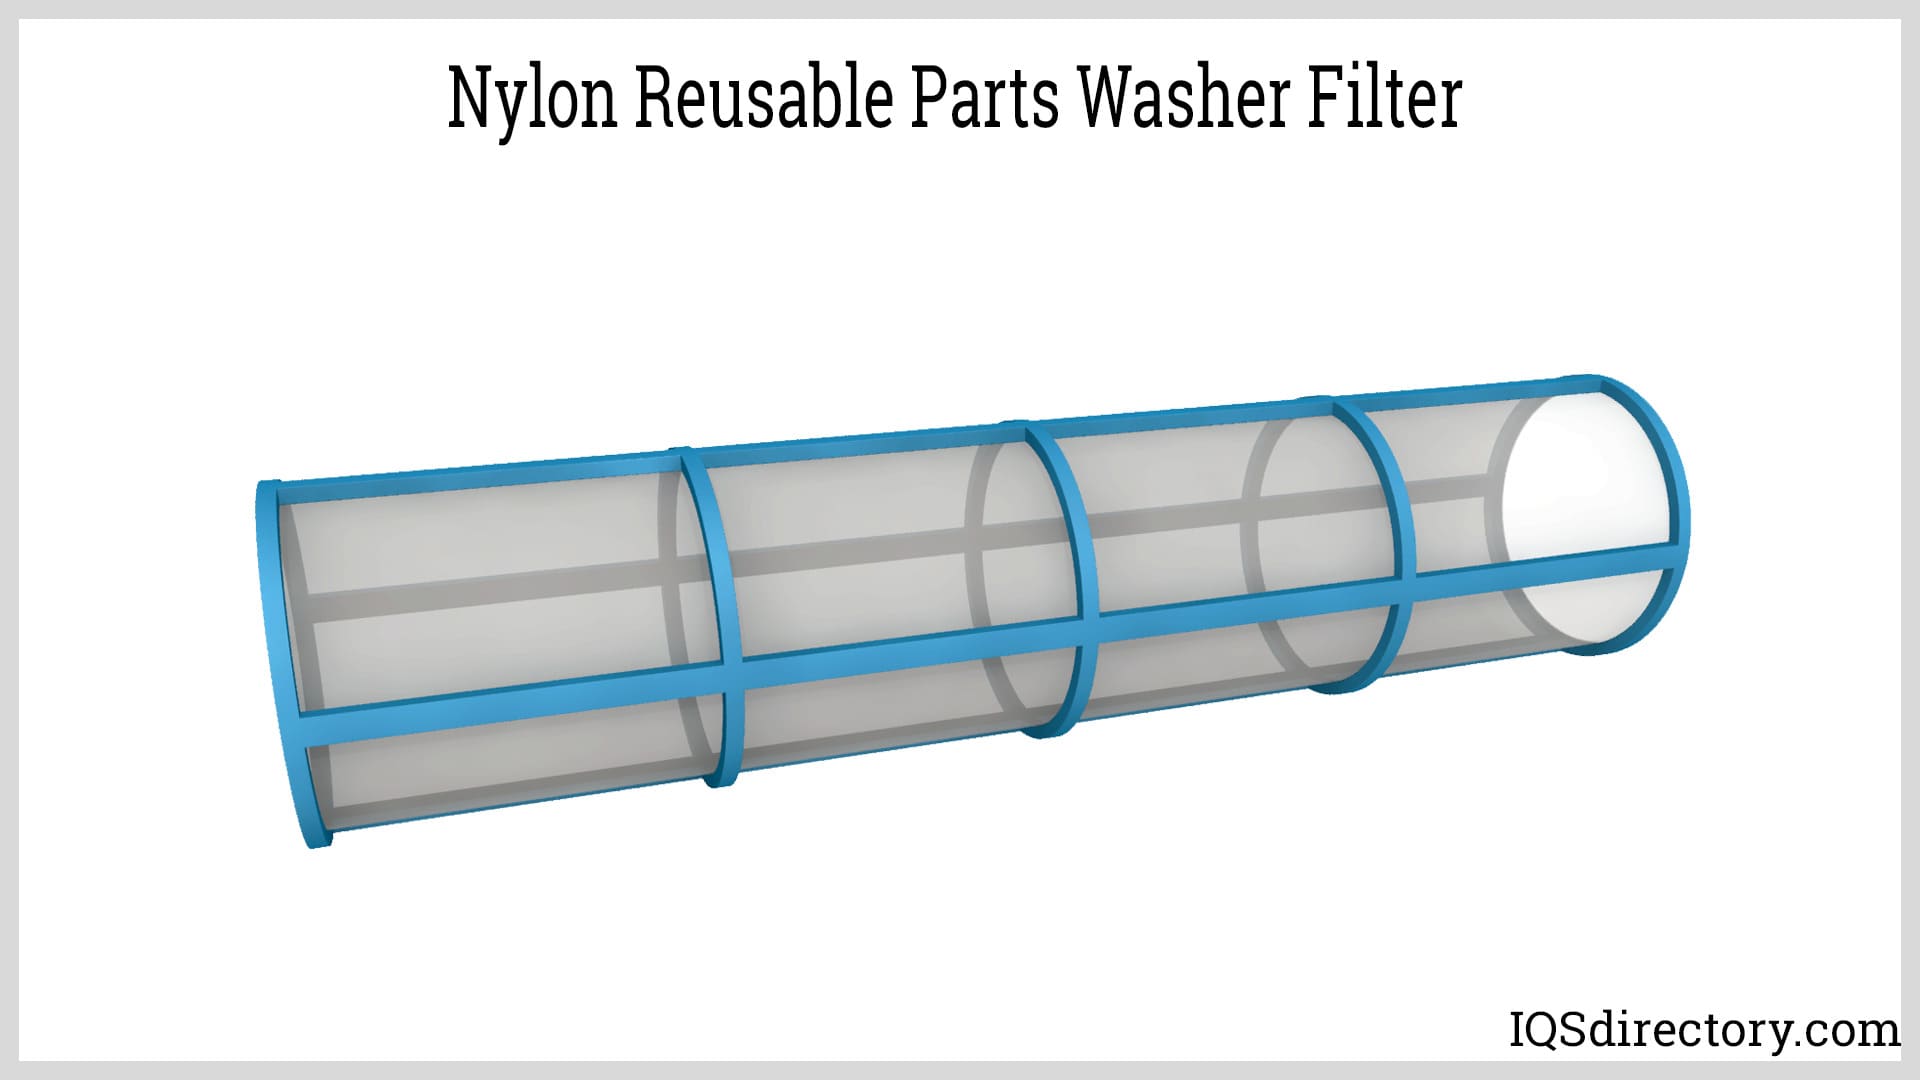 Nylon Reusable Parts Washer Filter